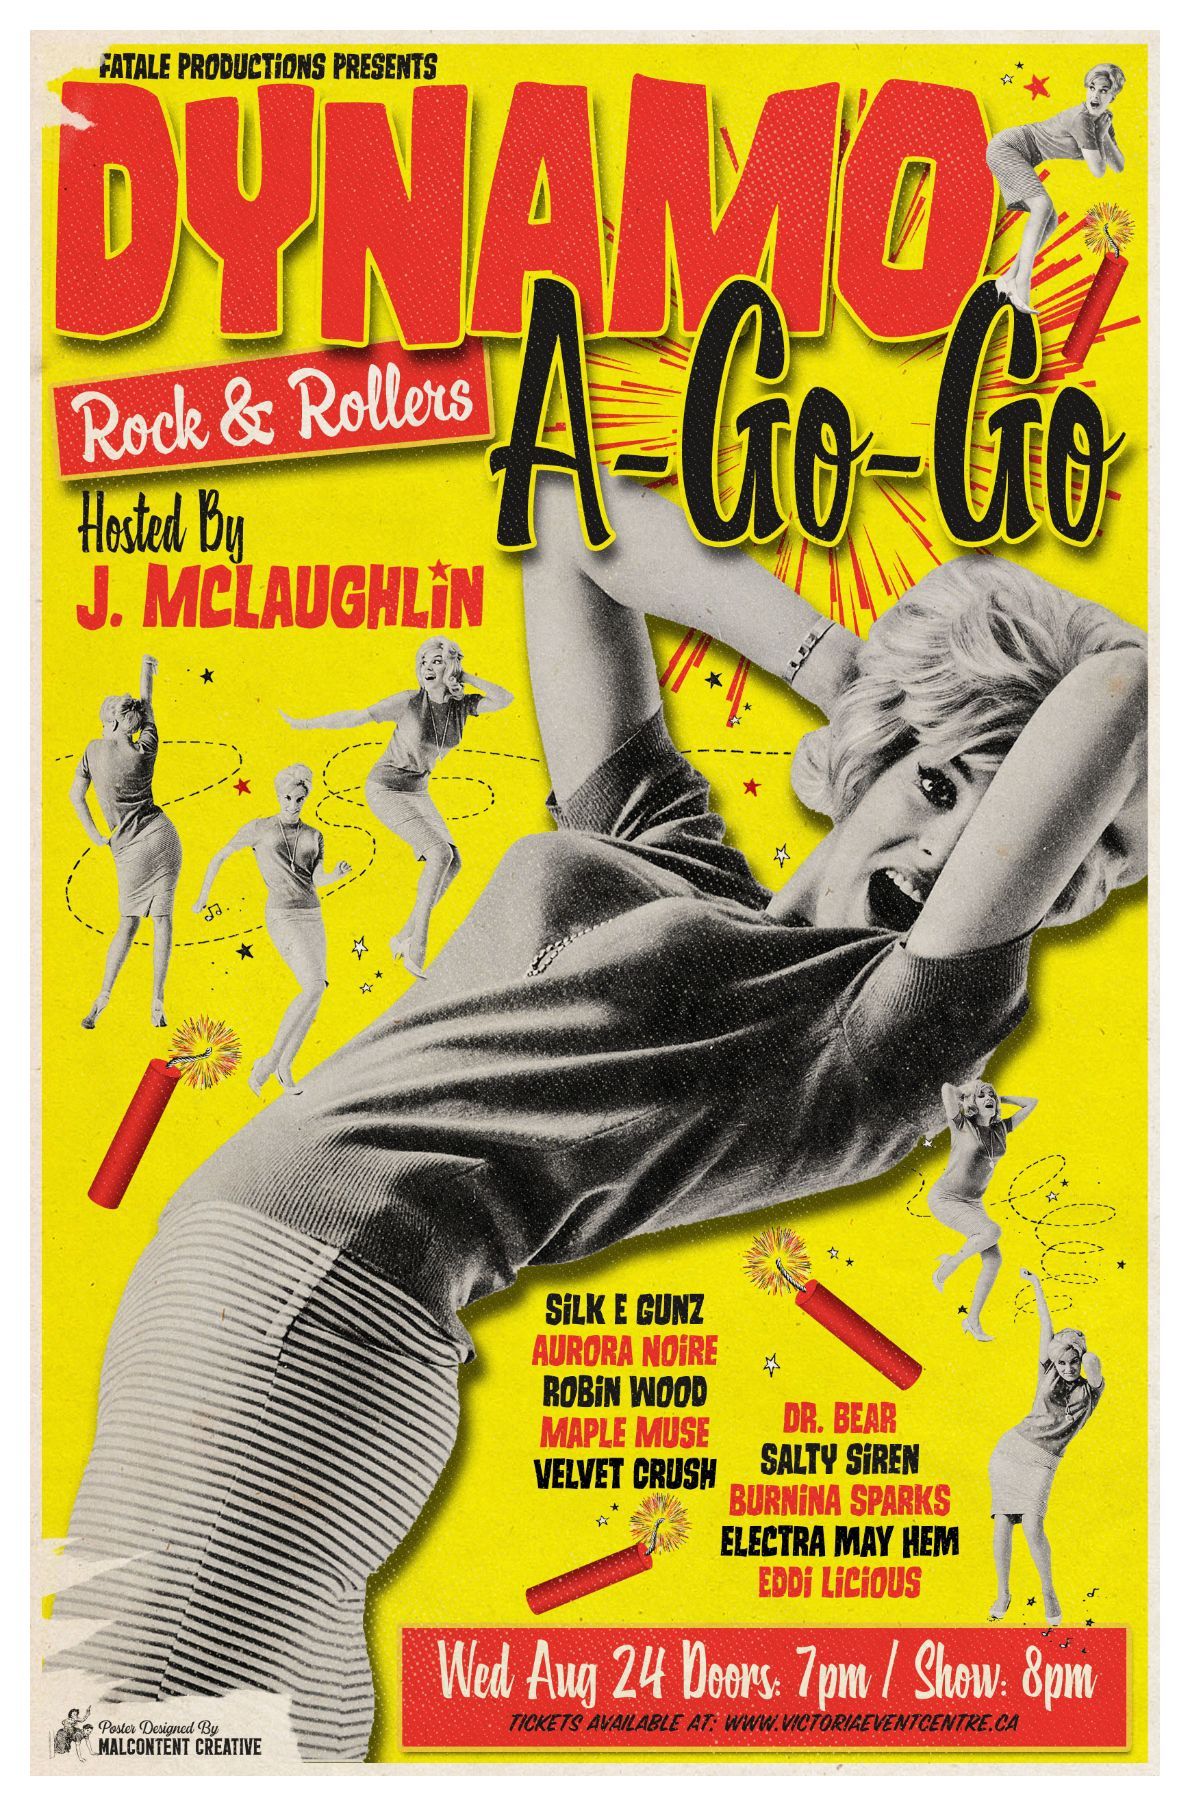 August 24th _ Dynamo-A-Go-Go _ Rock & Rollers (1)